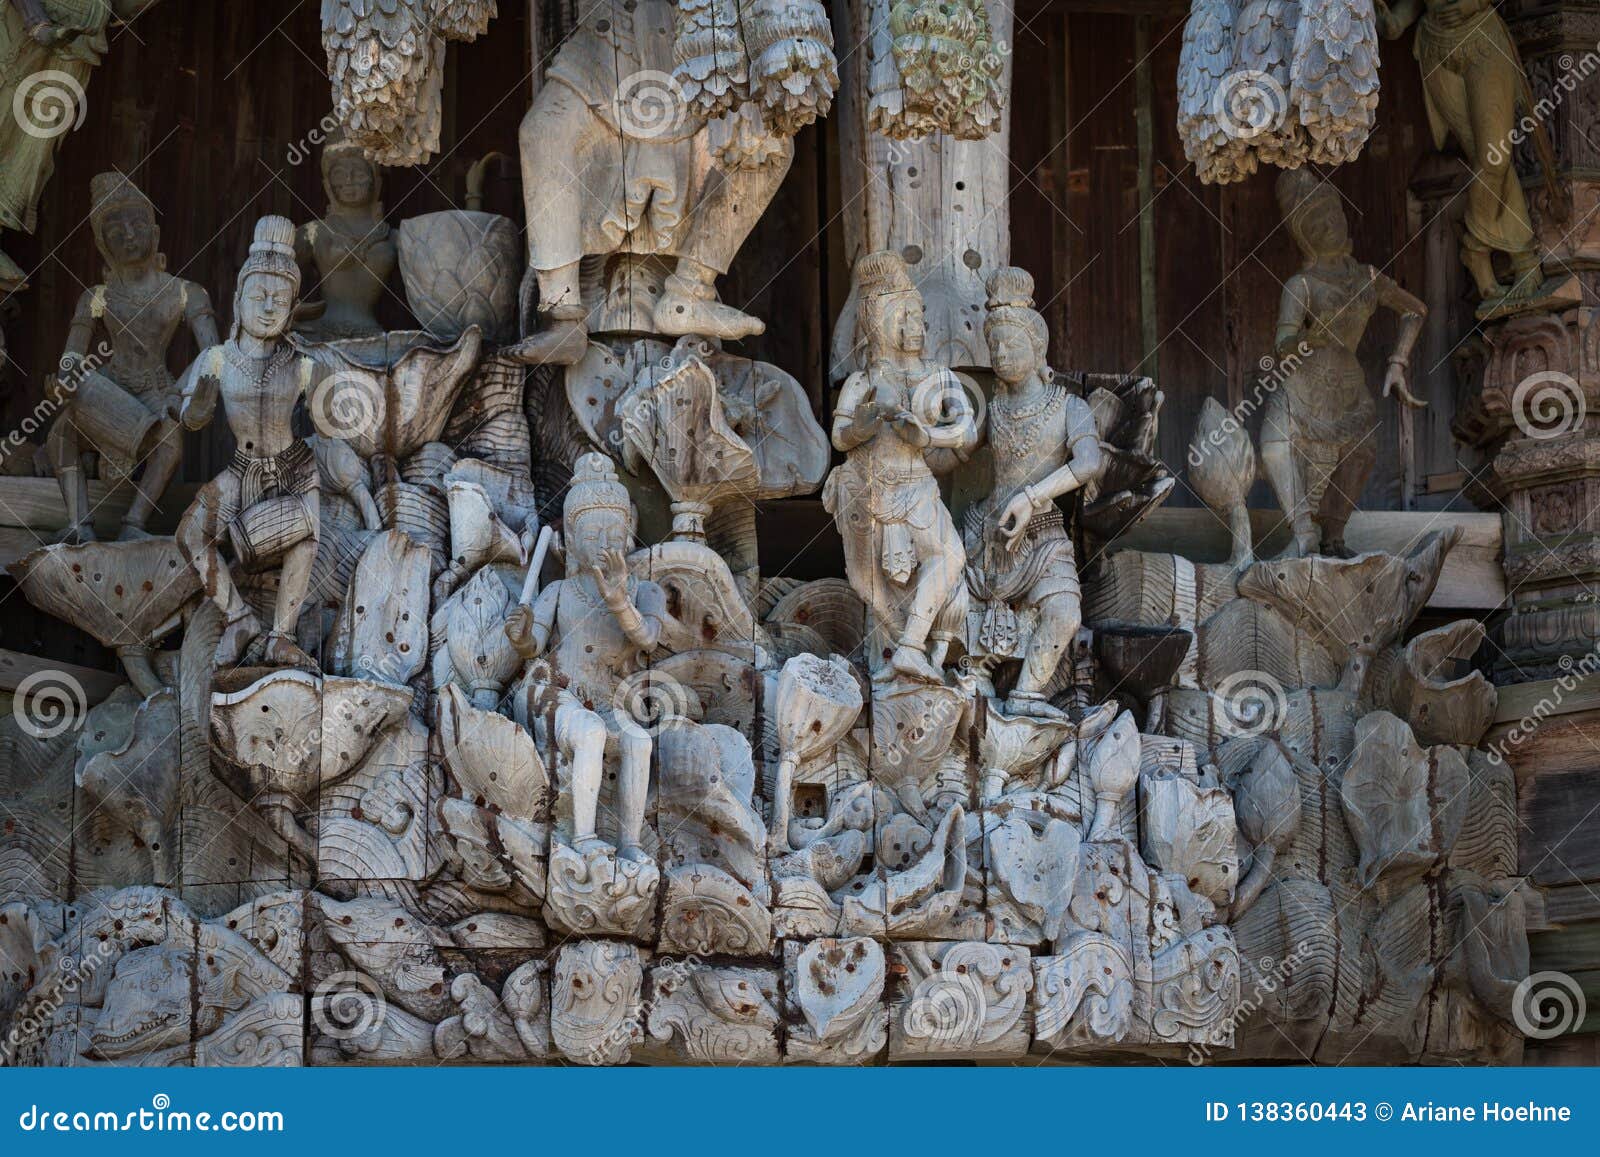 wooden sculpturers at pattaya sanctuary of truth in thailand